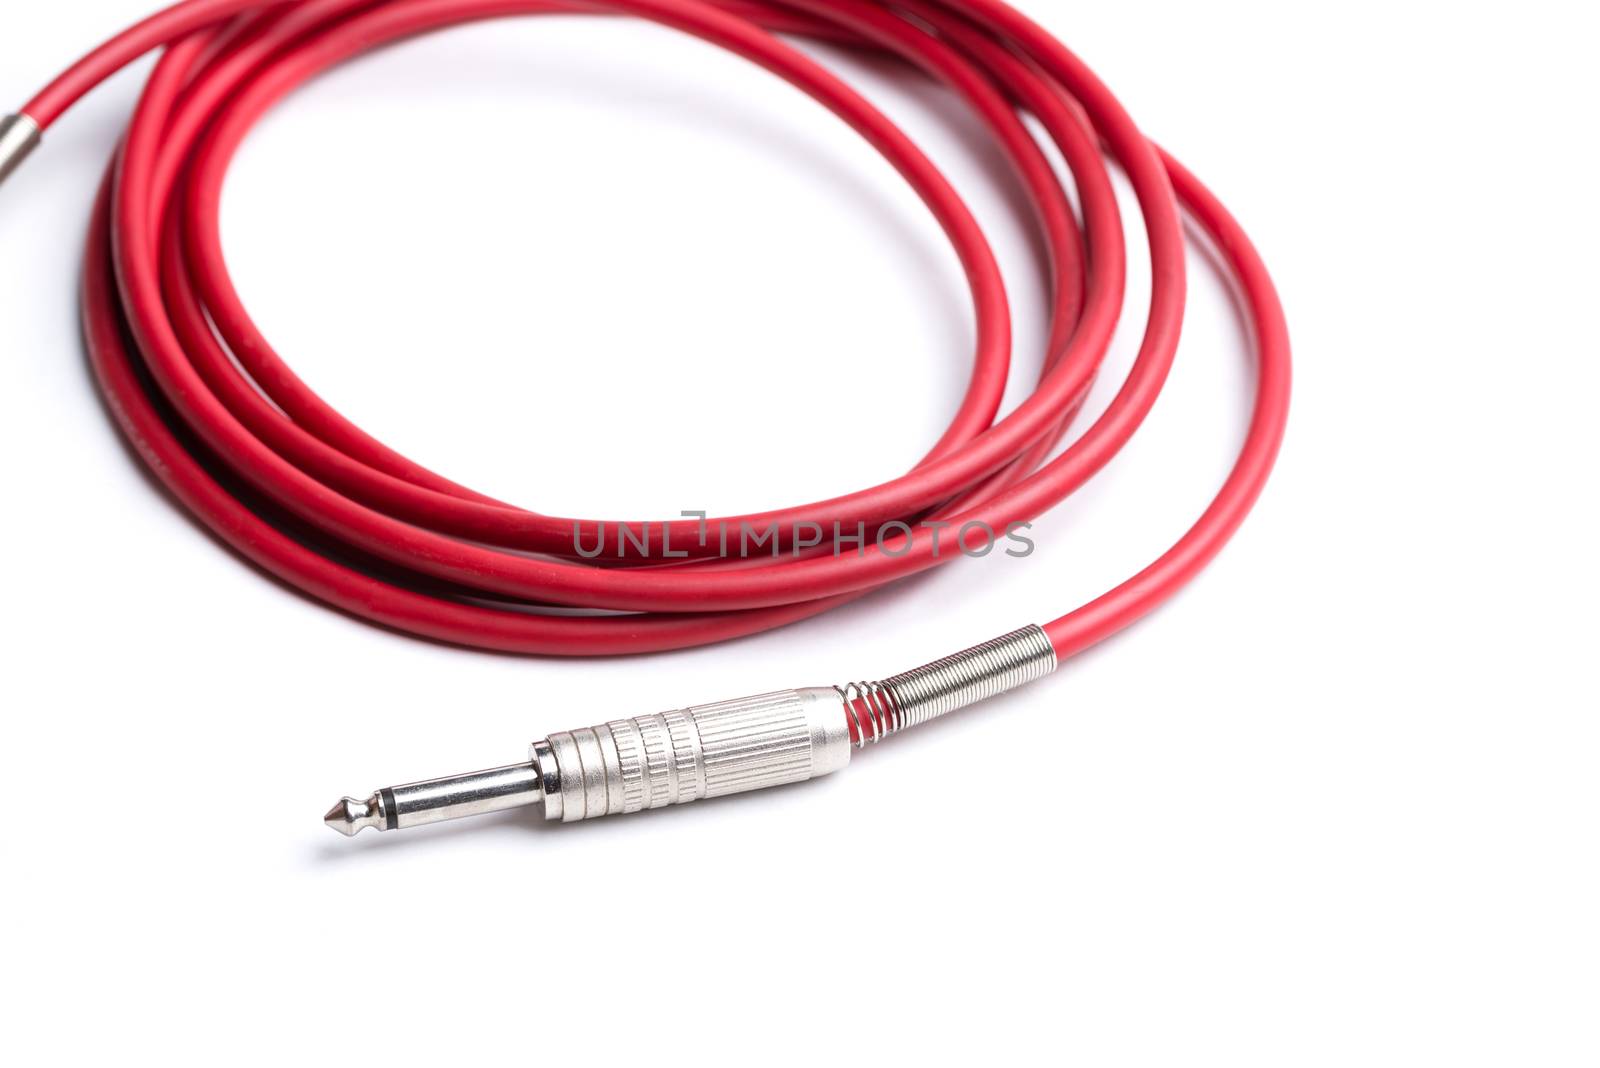 A red quarter inch cable for electric guitar isolated on a white background.